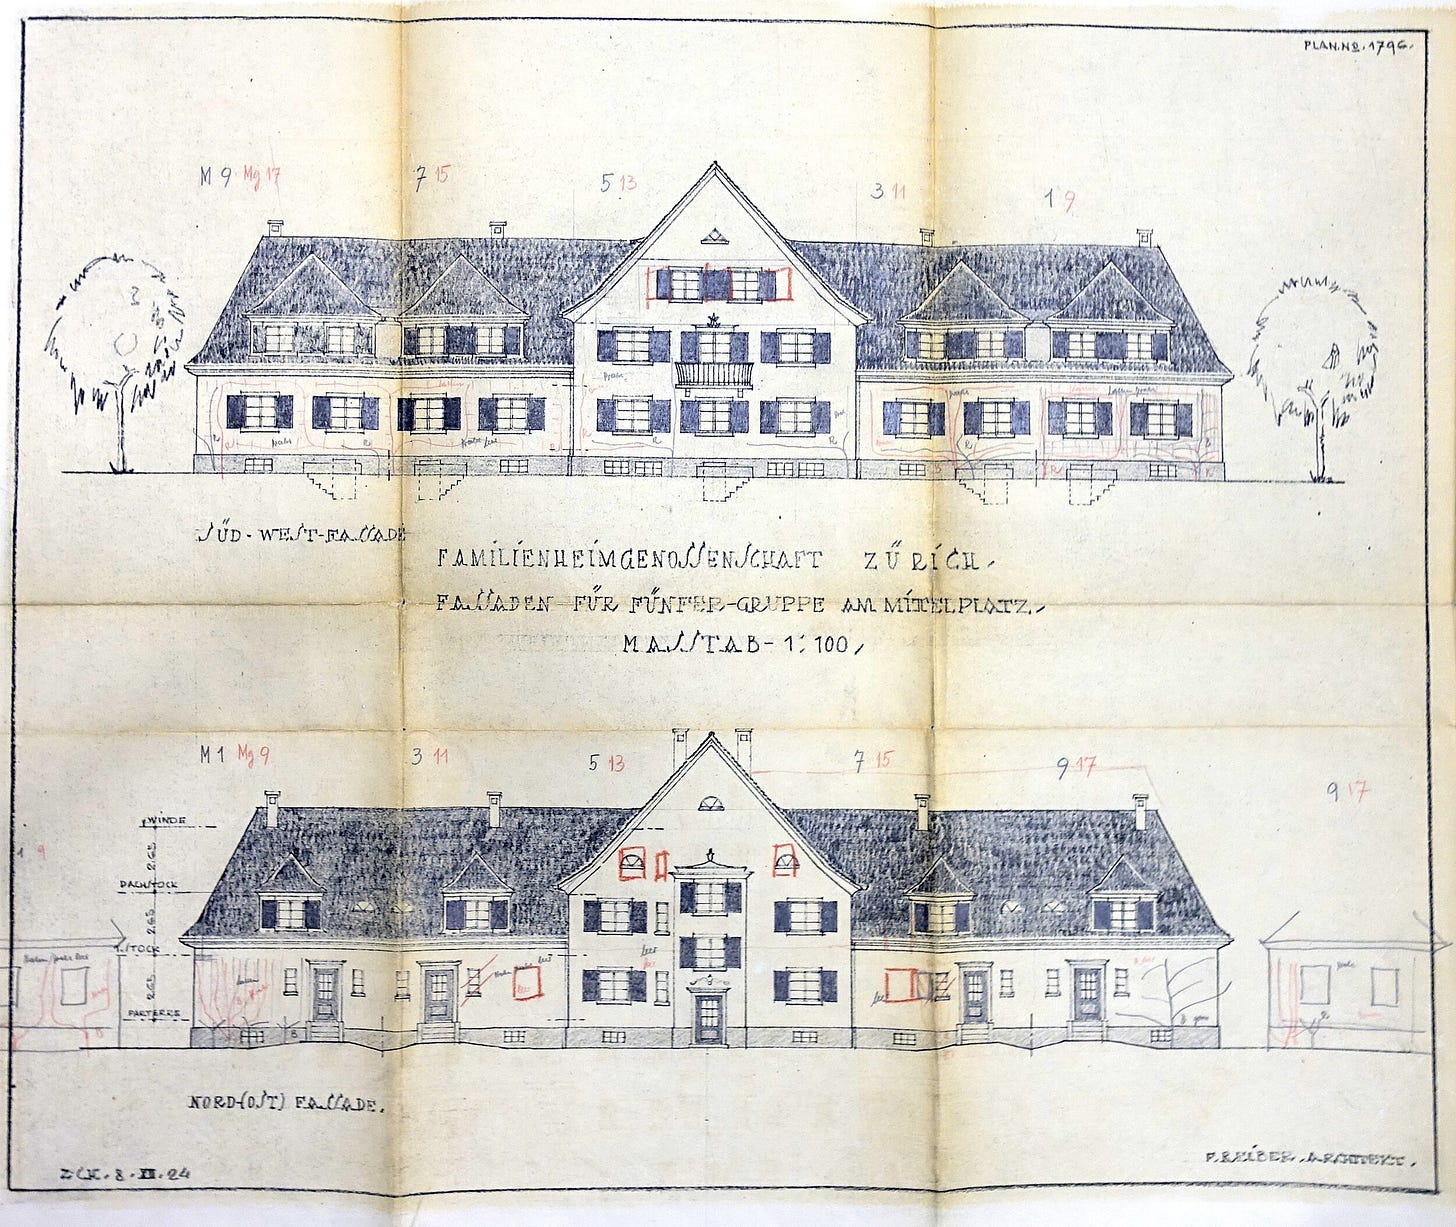 Figure 3. The Familienheim Genossenschaft Zürich is one of the first cooperative organizations to emerge in the 1920s to provide housing for working-class families on the outskirts of Switzerland’s largest and rapidly industrializing city. The elevation drawing of a five-unit building by architect F. Reiber shows the traditional  Heimatstil -architecture favored at the time. Courtesy of FGZ Archiv.